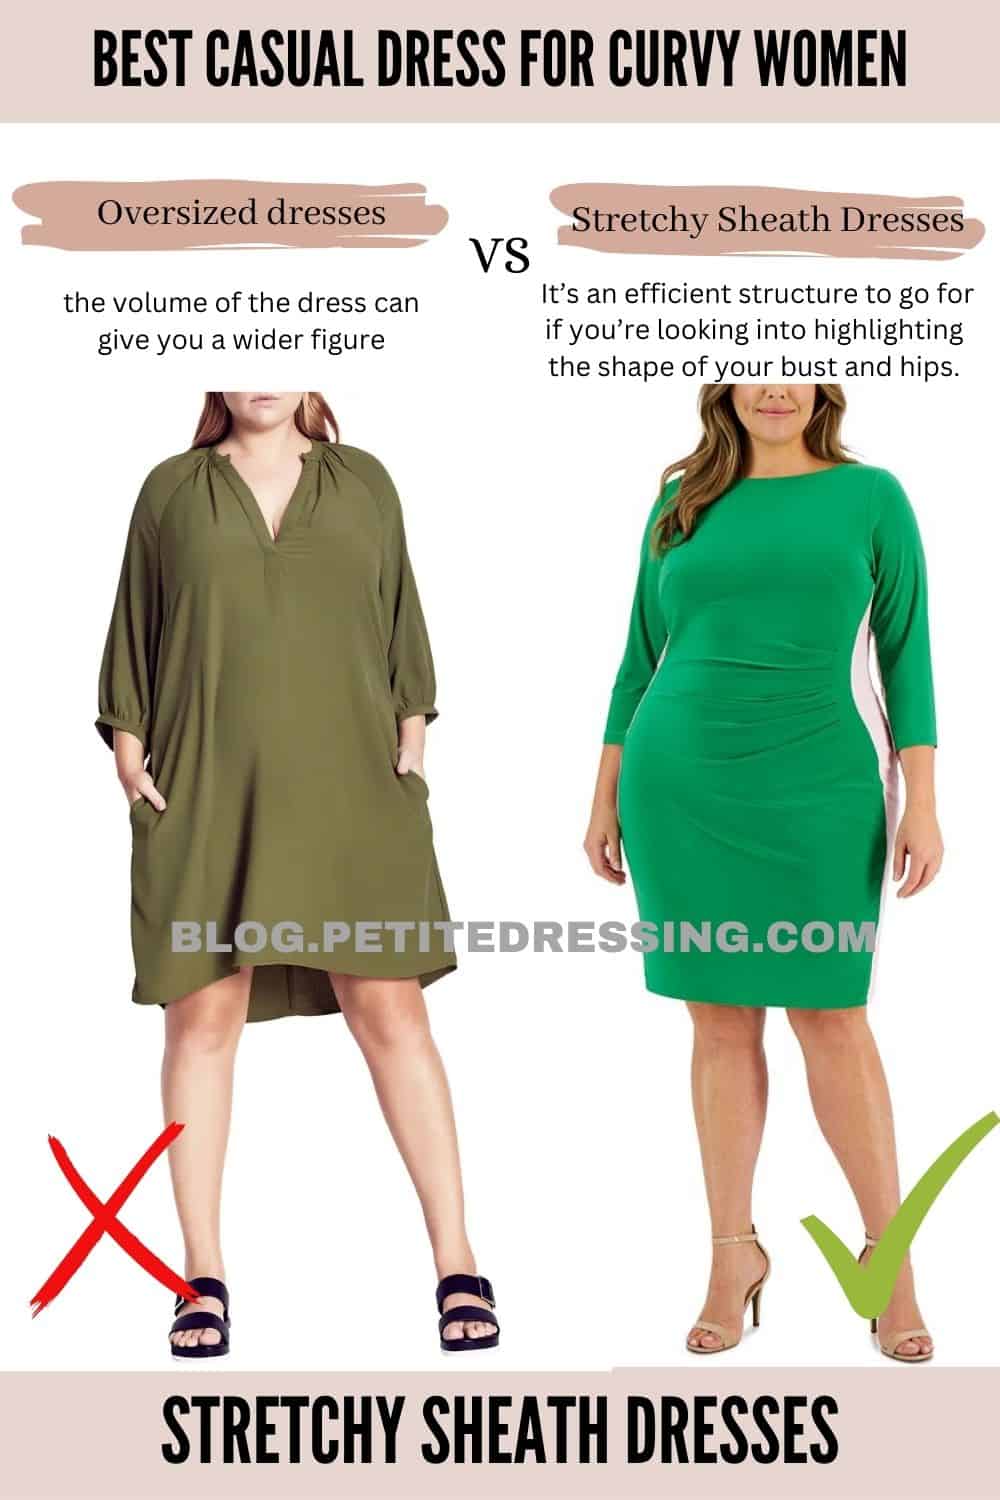 The Casual Dress Guide for Curvy Women